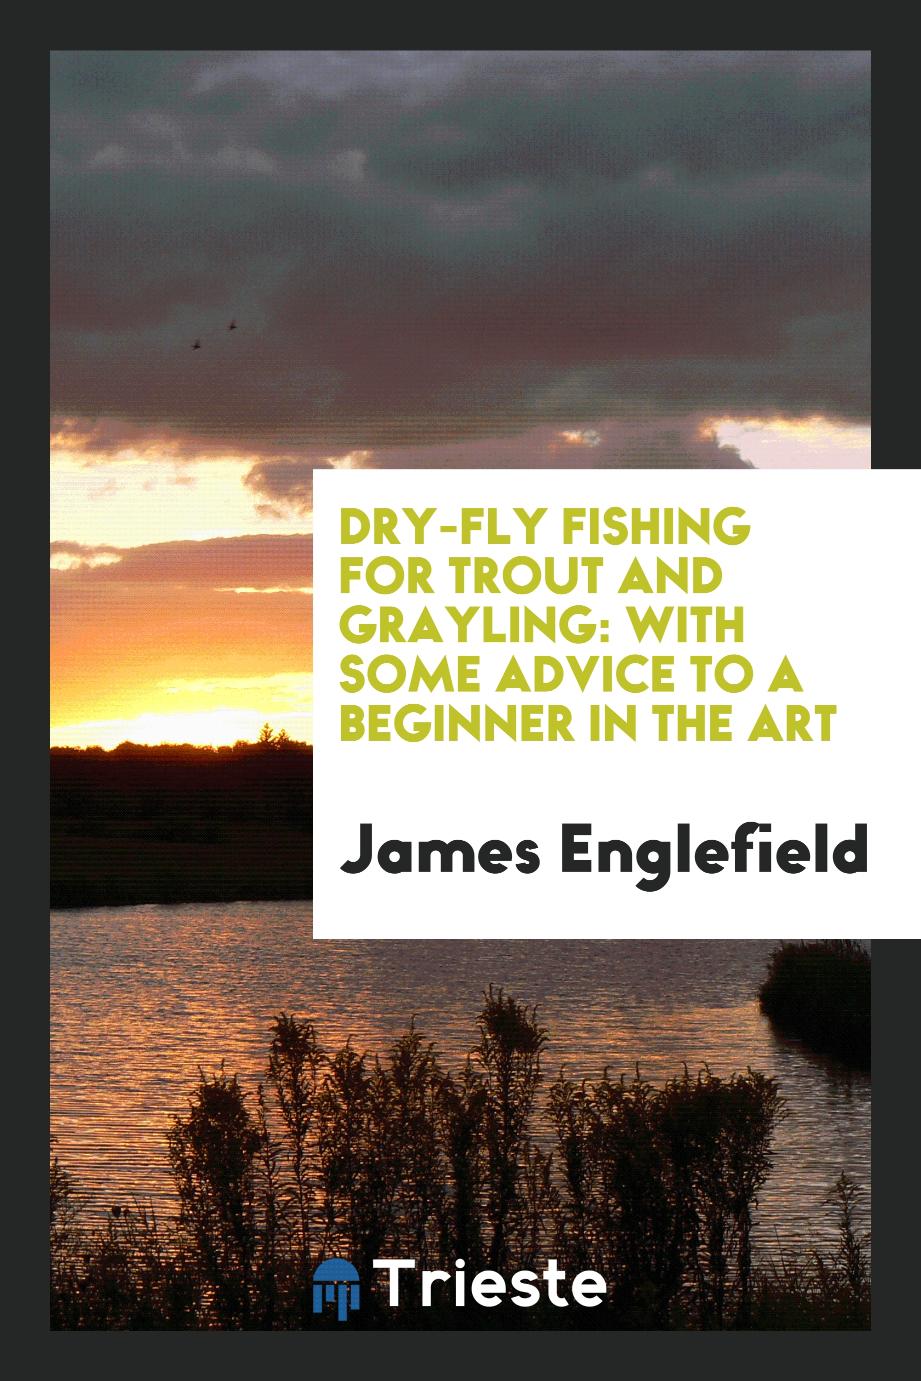 Dry-Fly Fishing for Trout and Grayling: With Some Advice to a Beginner in the Art